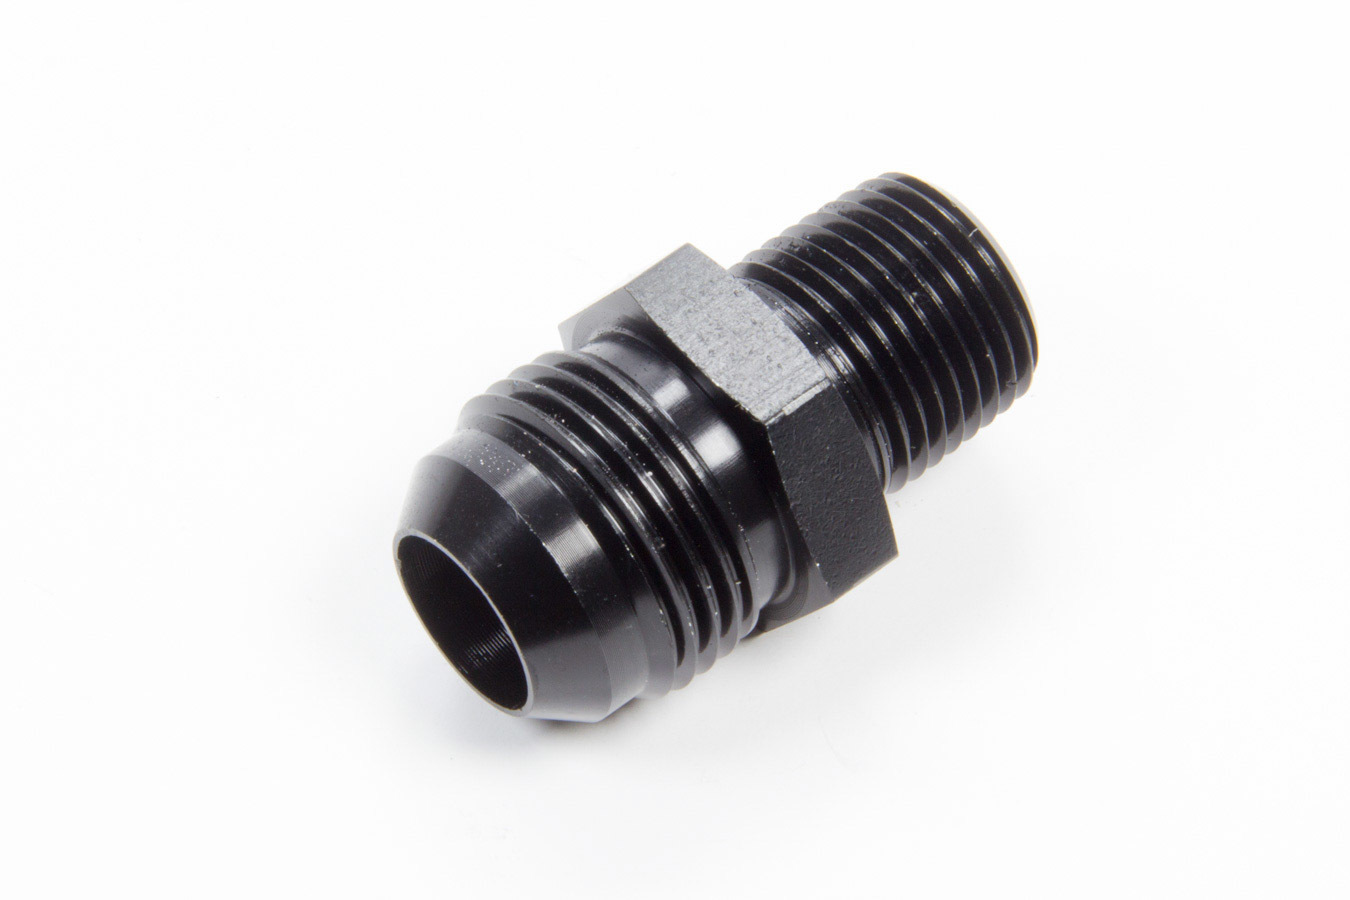 Aeroquip FCM5010 Fitting, Adapter, Straight, 12 AN Male to 1/2 in NPT Male, Aluminum, Black Anodized, Each